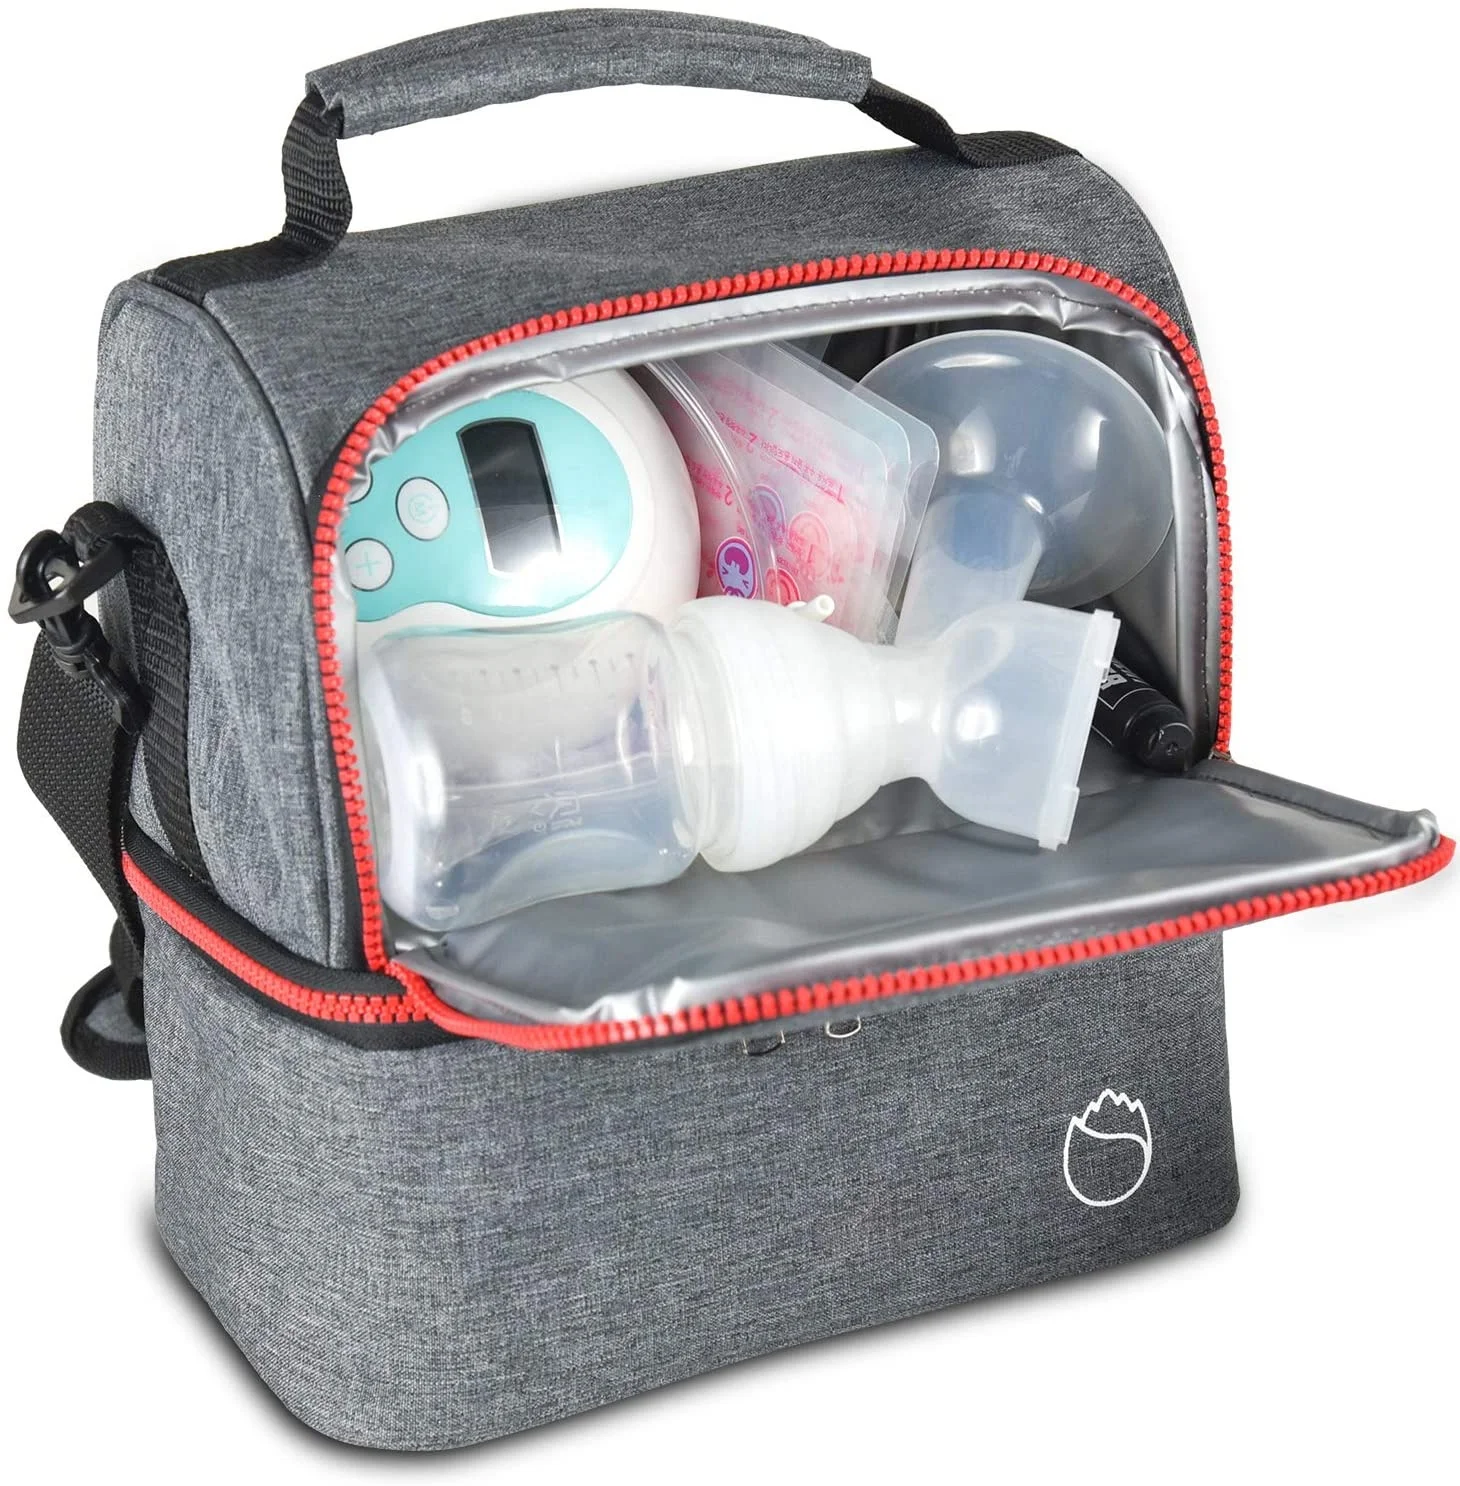 

9 Liter Double Layer Insulated Cooler Bag Lunch Box and Food Delivery Bag Ideal for traveling and camping, Customized color